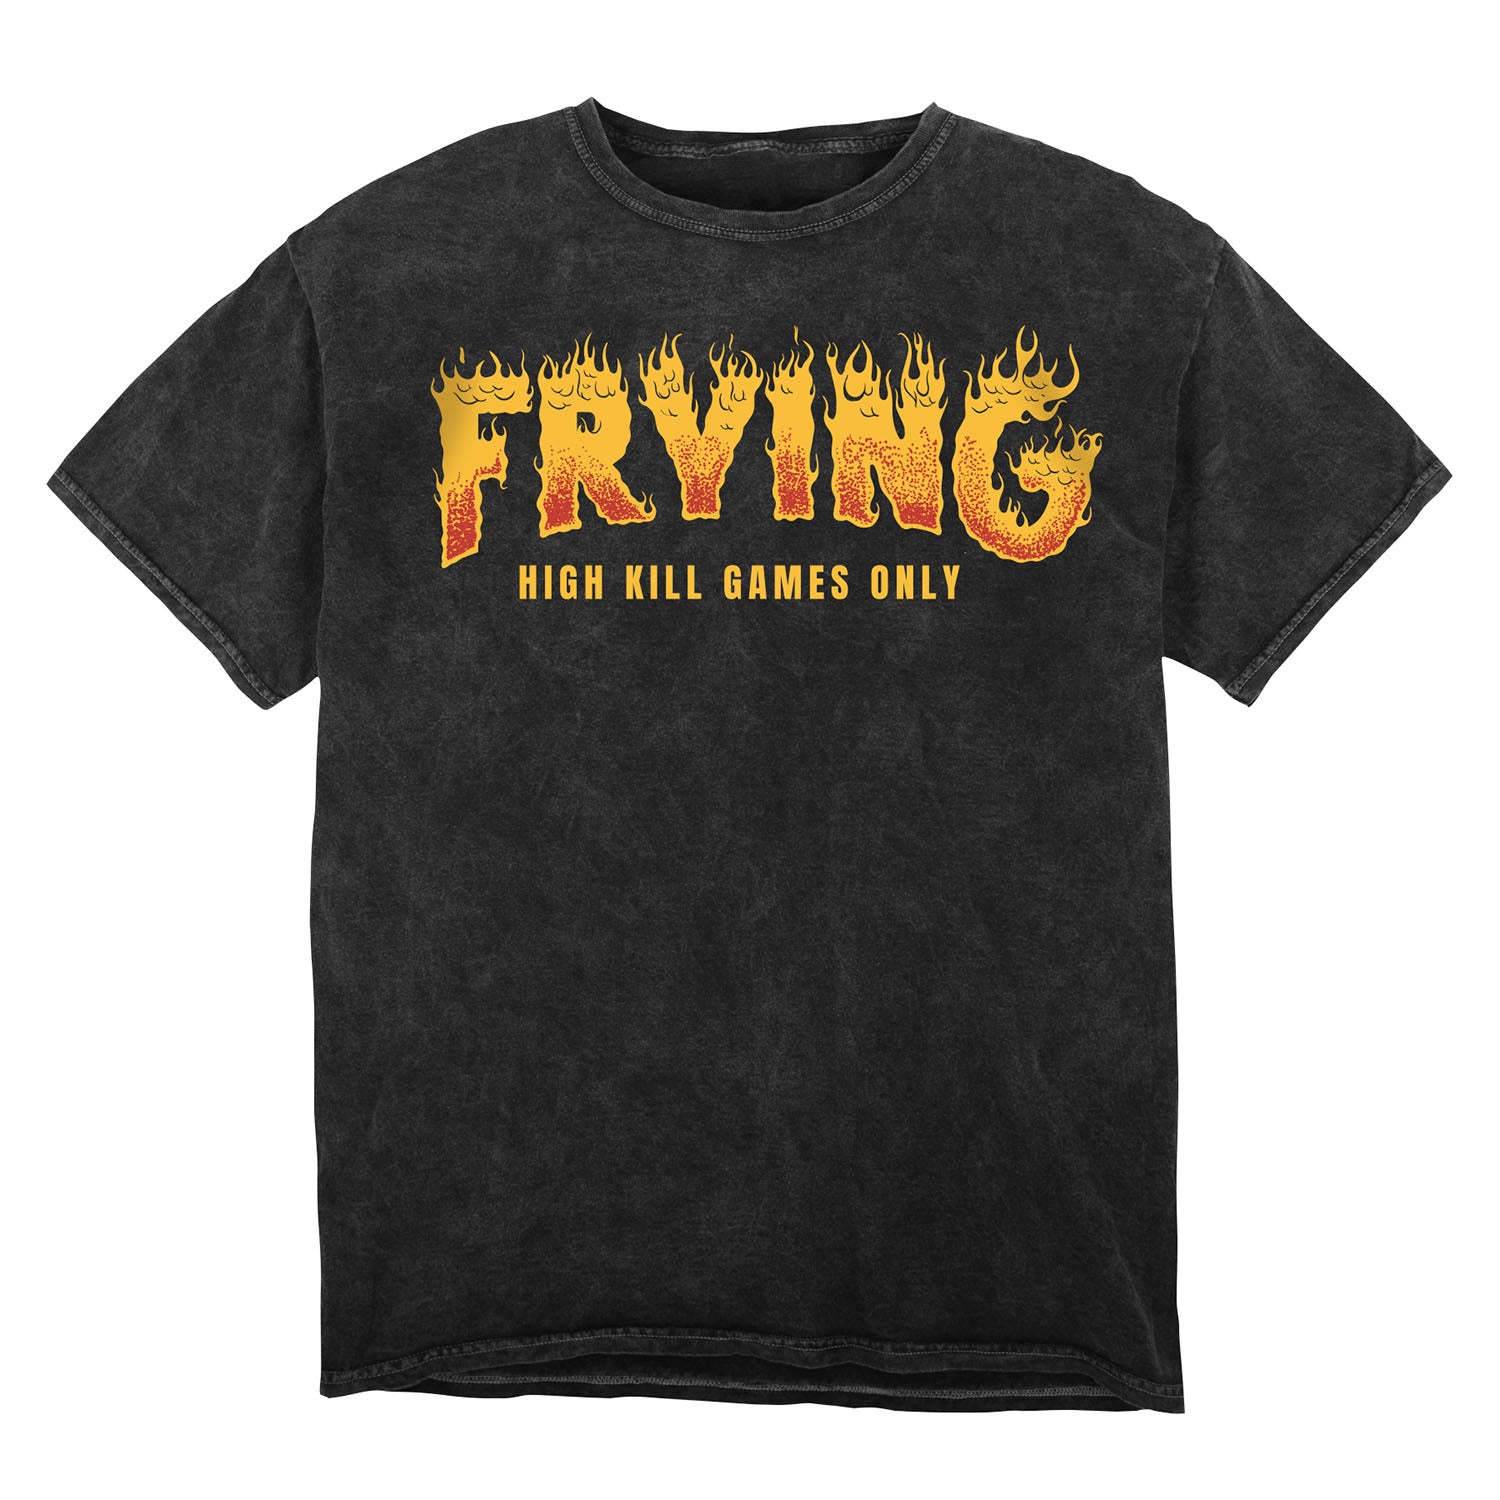 Call of Duty Mineral Wash Frying T-Shirt - Front View